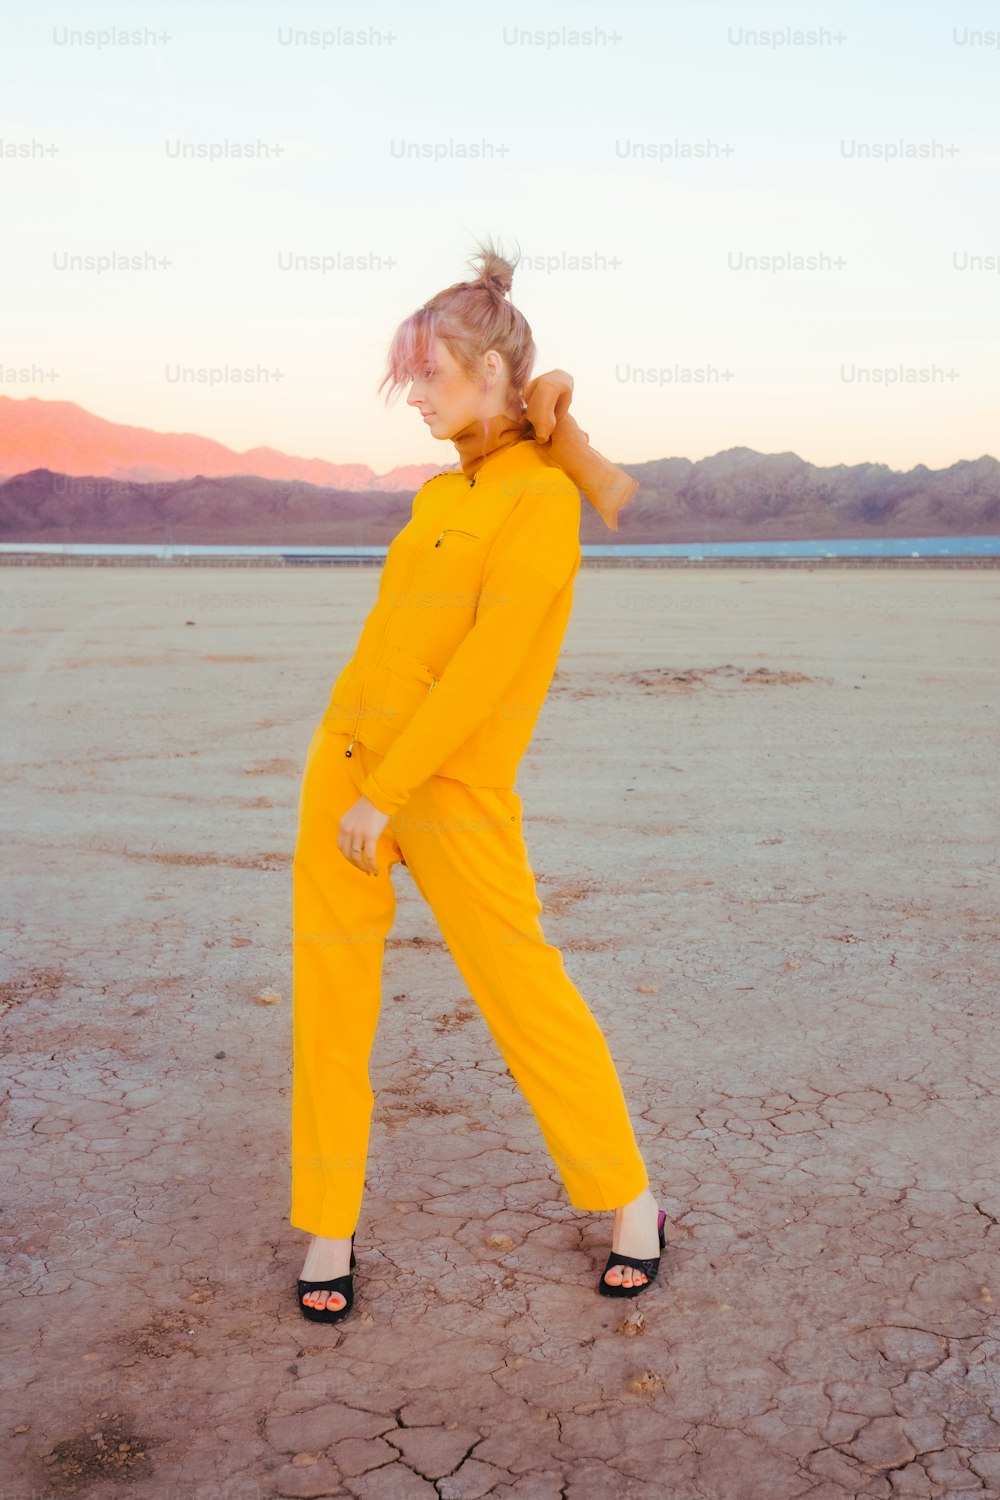 a woman in a yellow jumpsuit standing in the desert